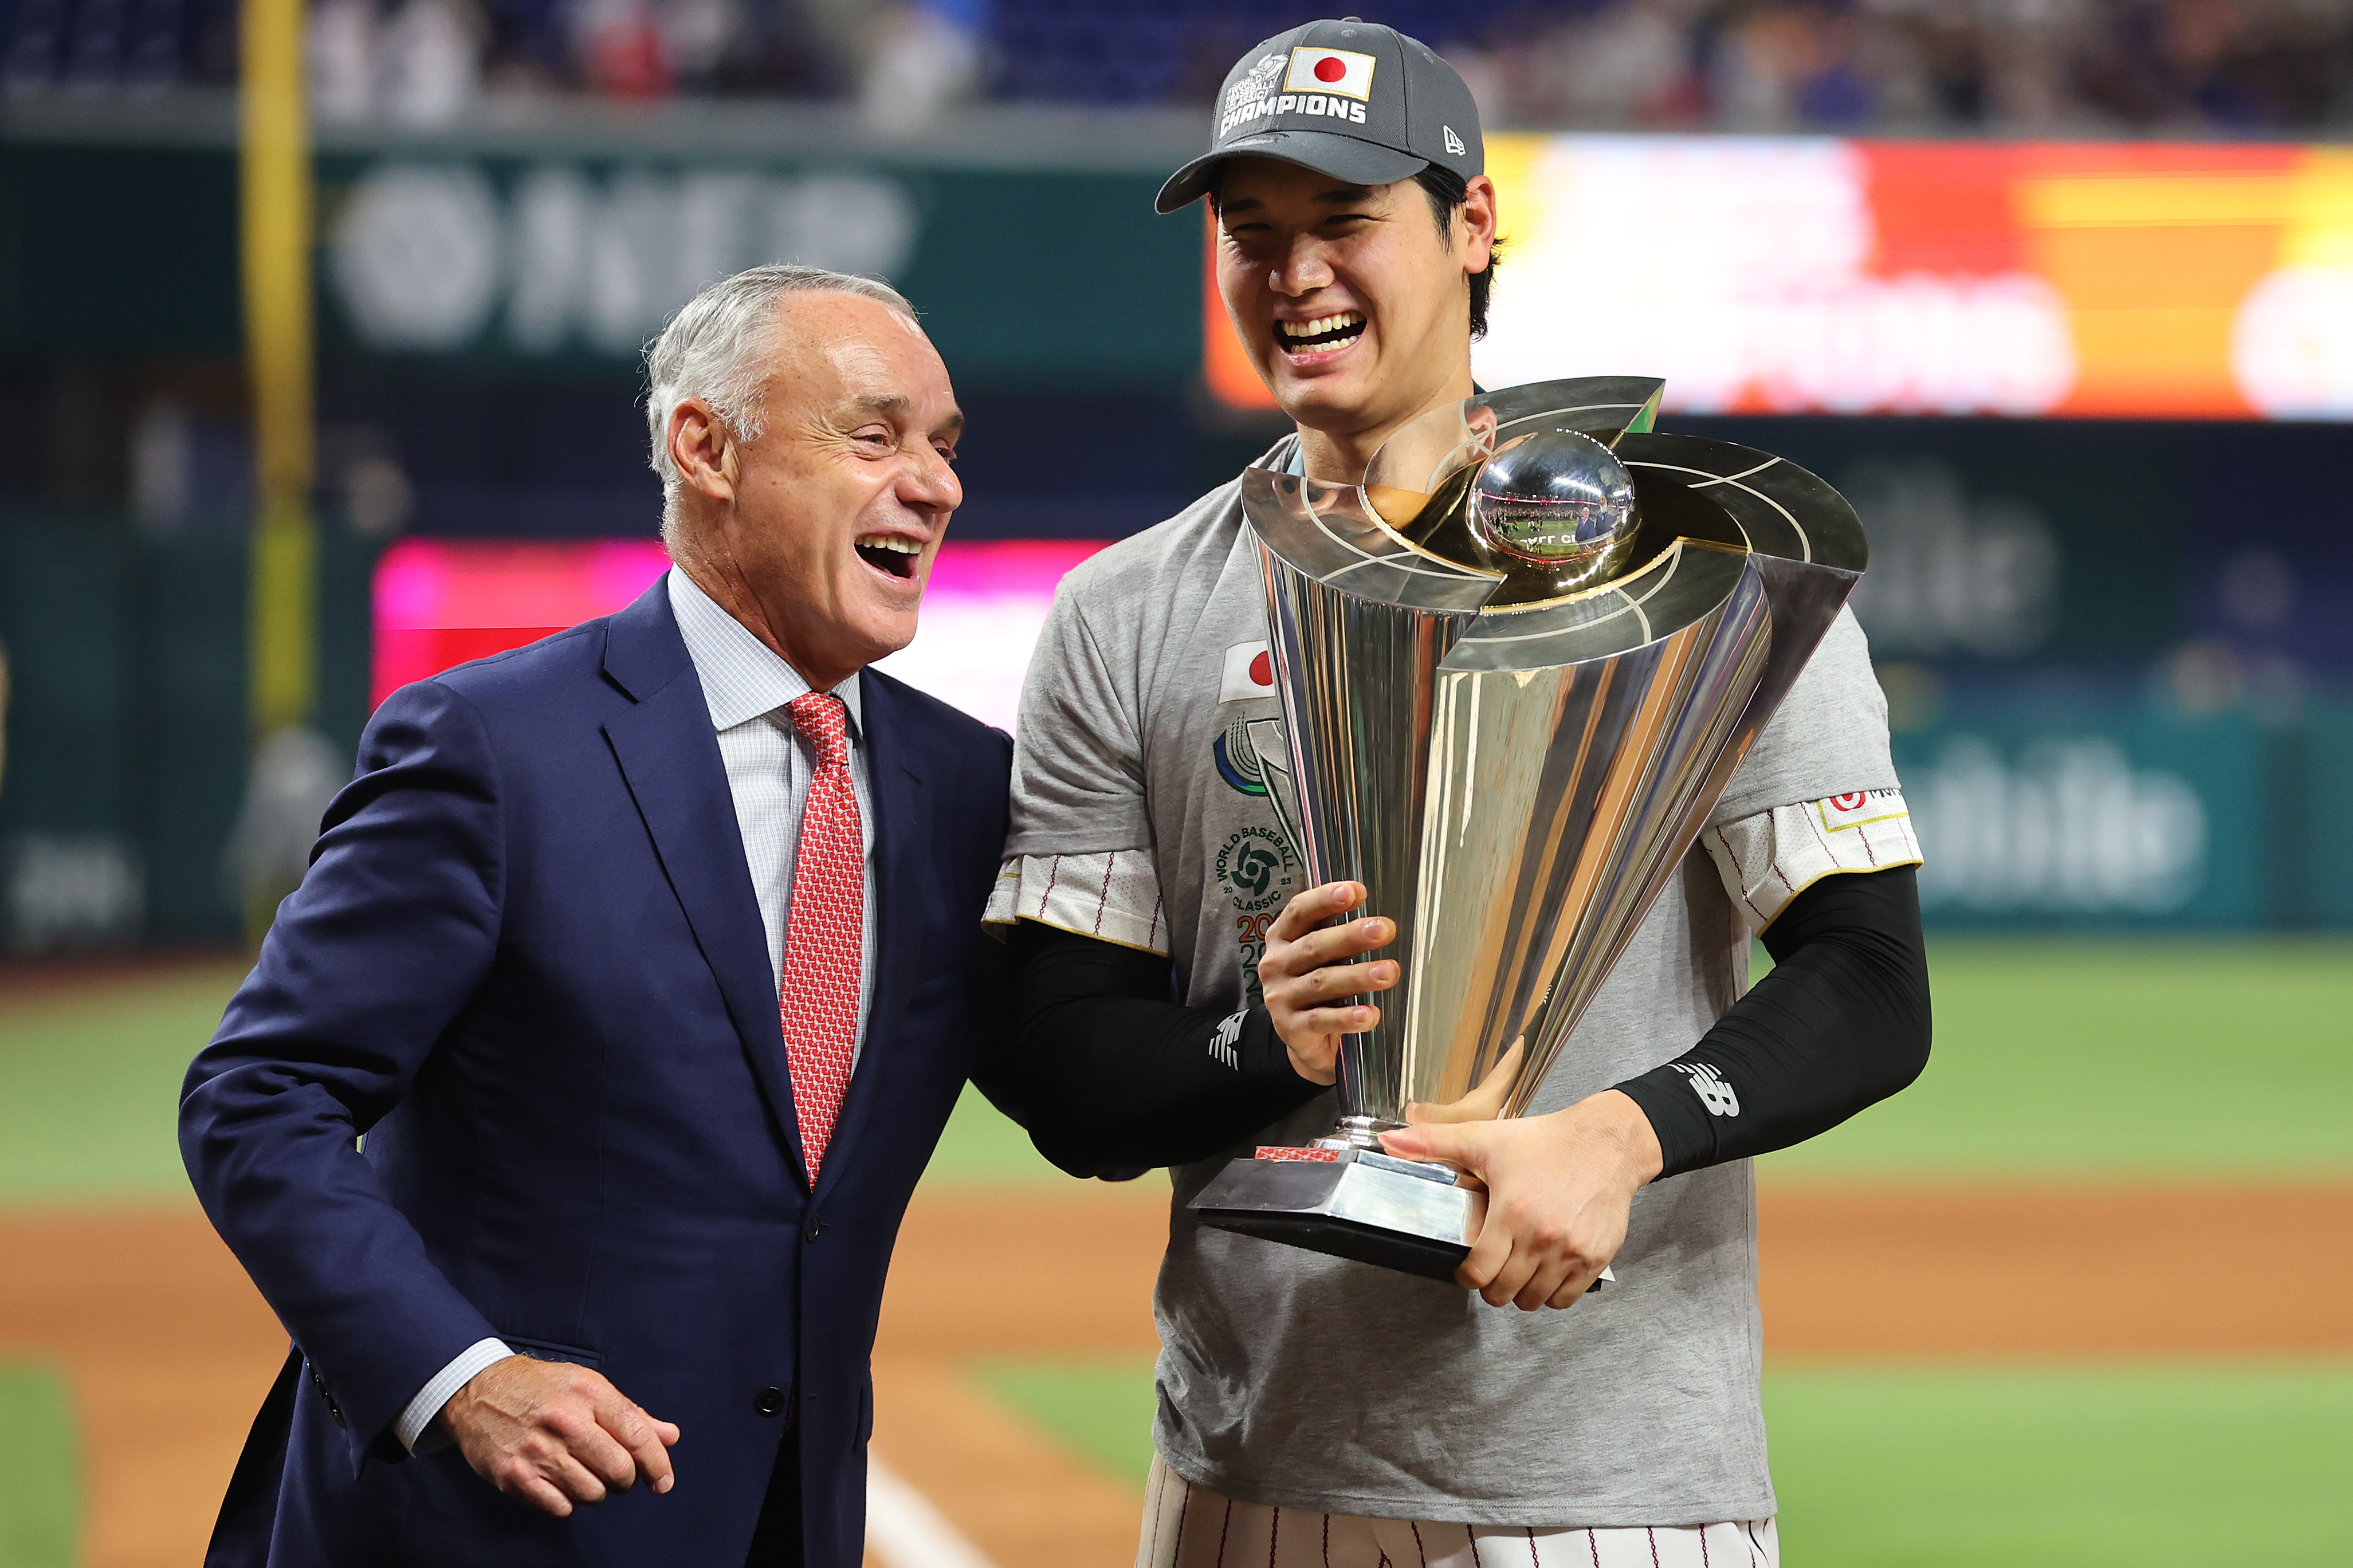 MLB commissioner Rob Manfred (L) congratulates pichter Shohei Ohtani of Japan after they defeat USA 3-2 in the World Baseball Classic Championship game at LoanDepot Park in Miami, Florida, March 21, 2023. /CFP 